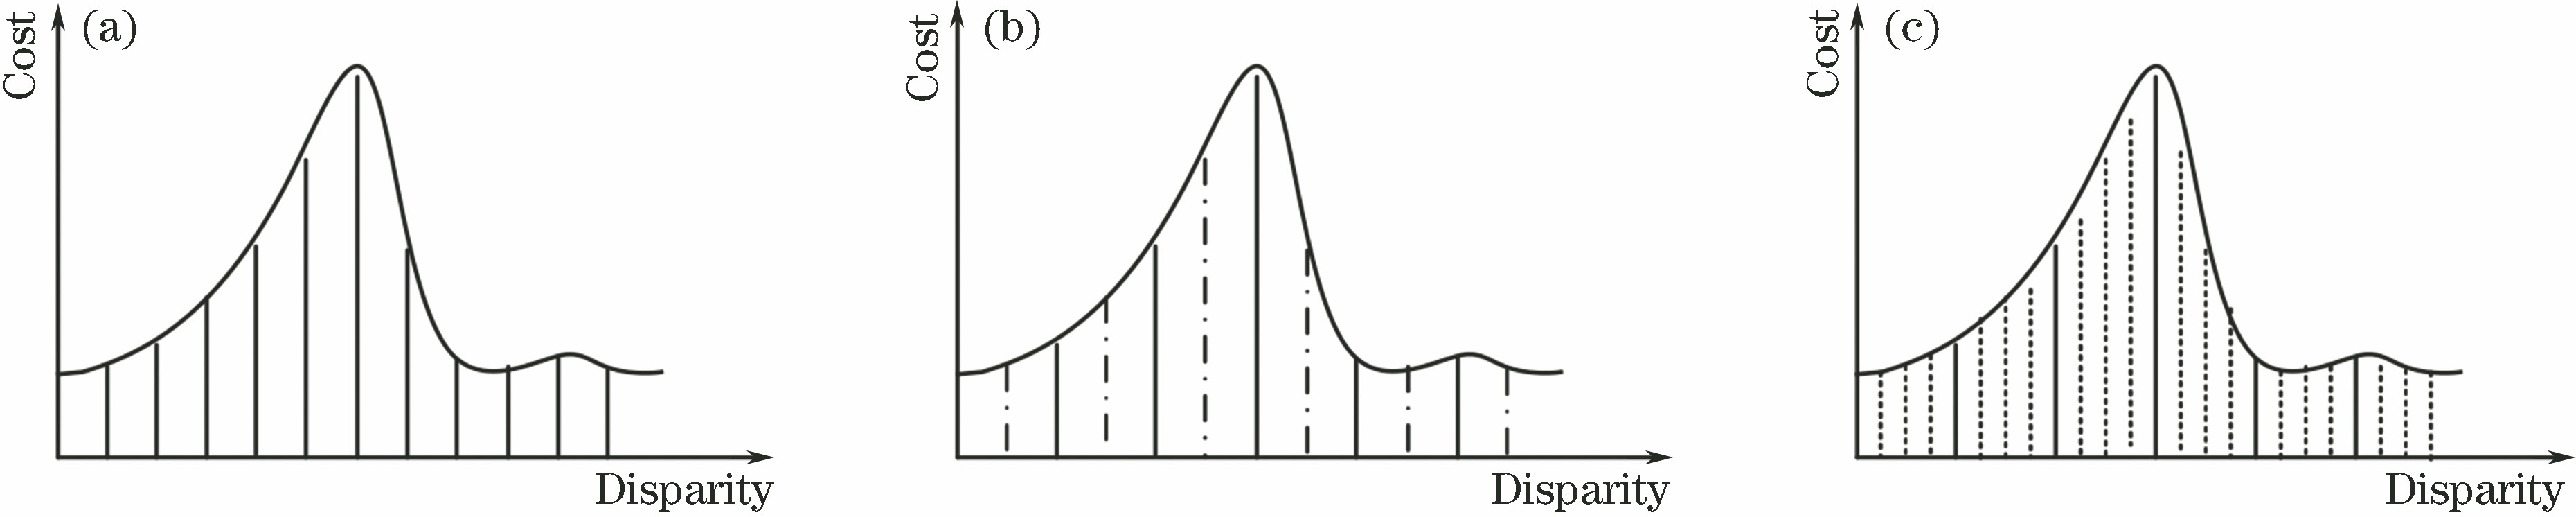 Graphical depiction of sampling cost in disparity dimension. (a) S=1, C=1; (b) S=2, C=1; (c) S=2, C=4